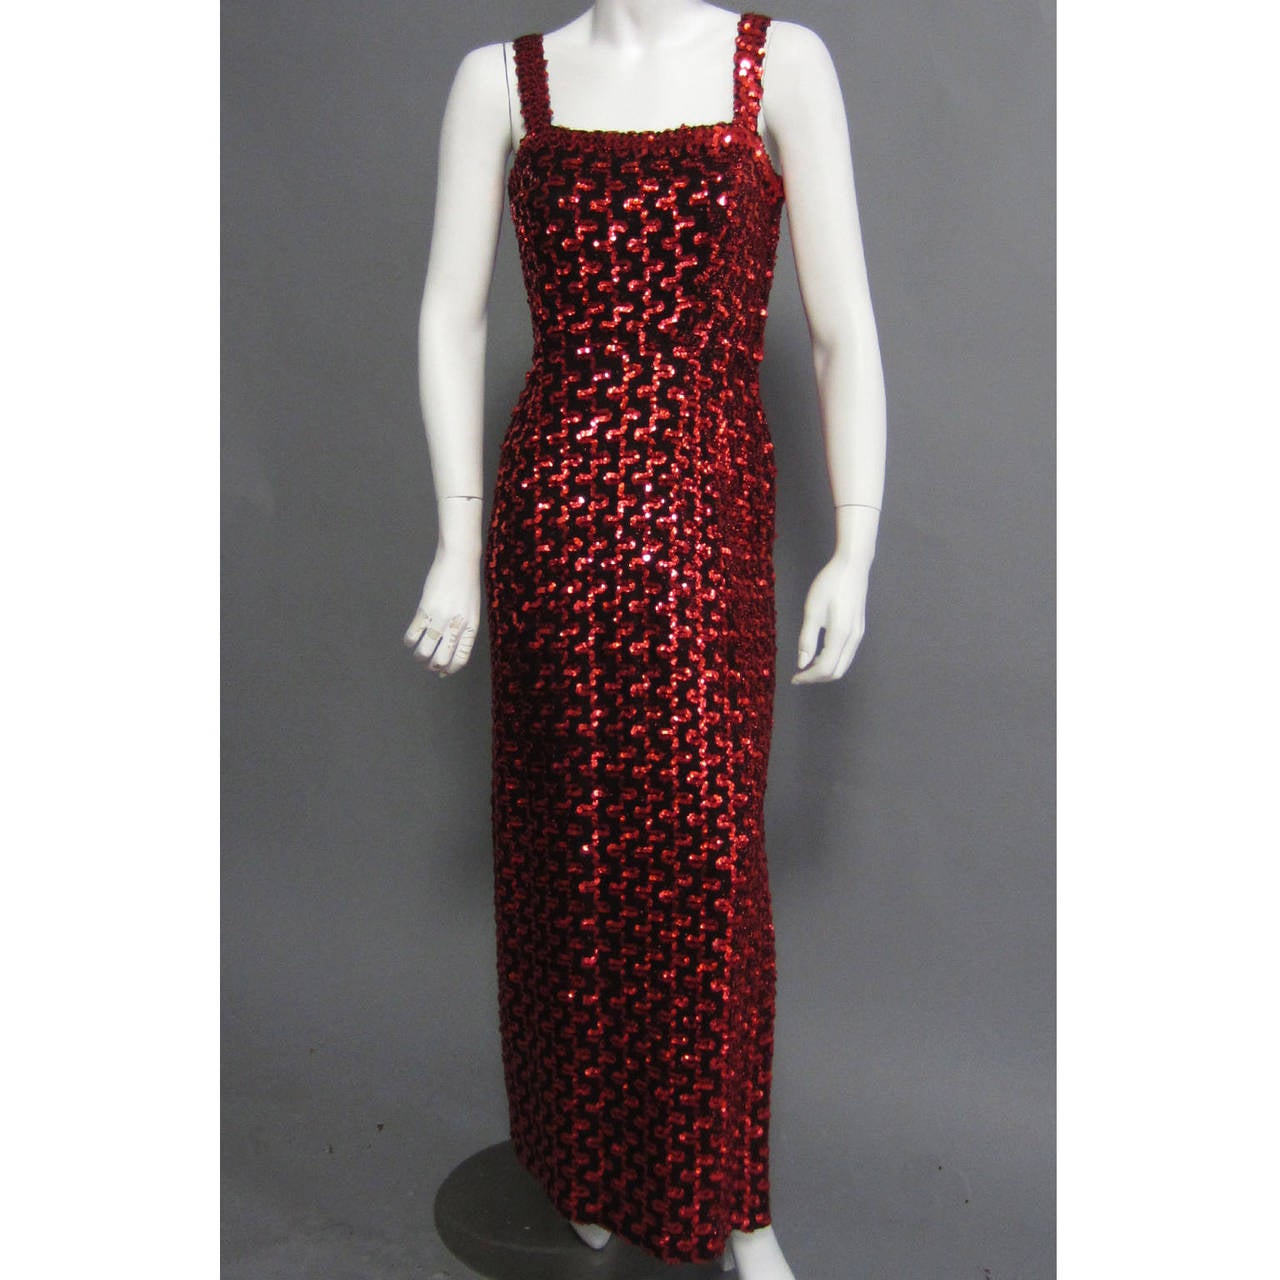 This LILLIE DIAMOND calls to mind silver screen vixens such as Jessica Rabbit; it must be the sequins. The knit fabric has a fair amount of stretch, allowing the fabric to cling to every curve of the body. The red sequins are stitched in rows,